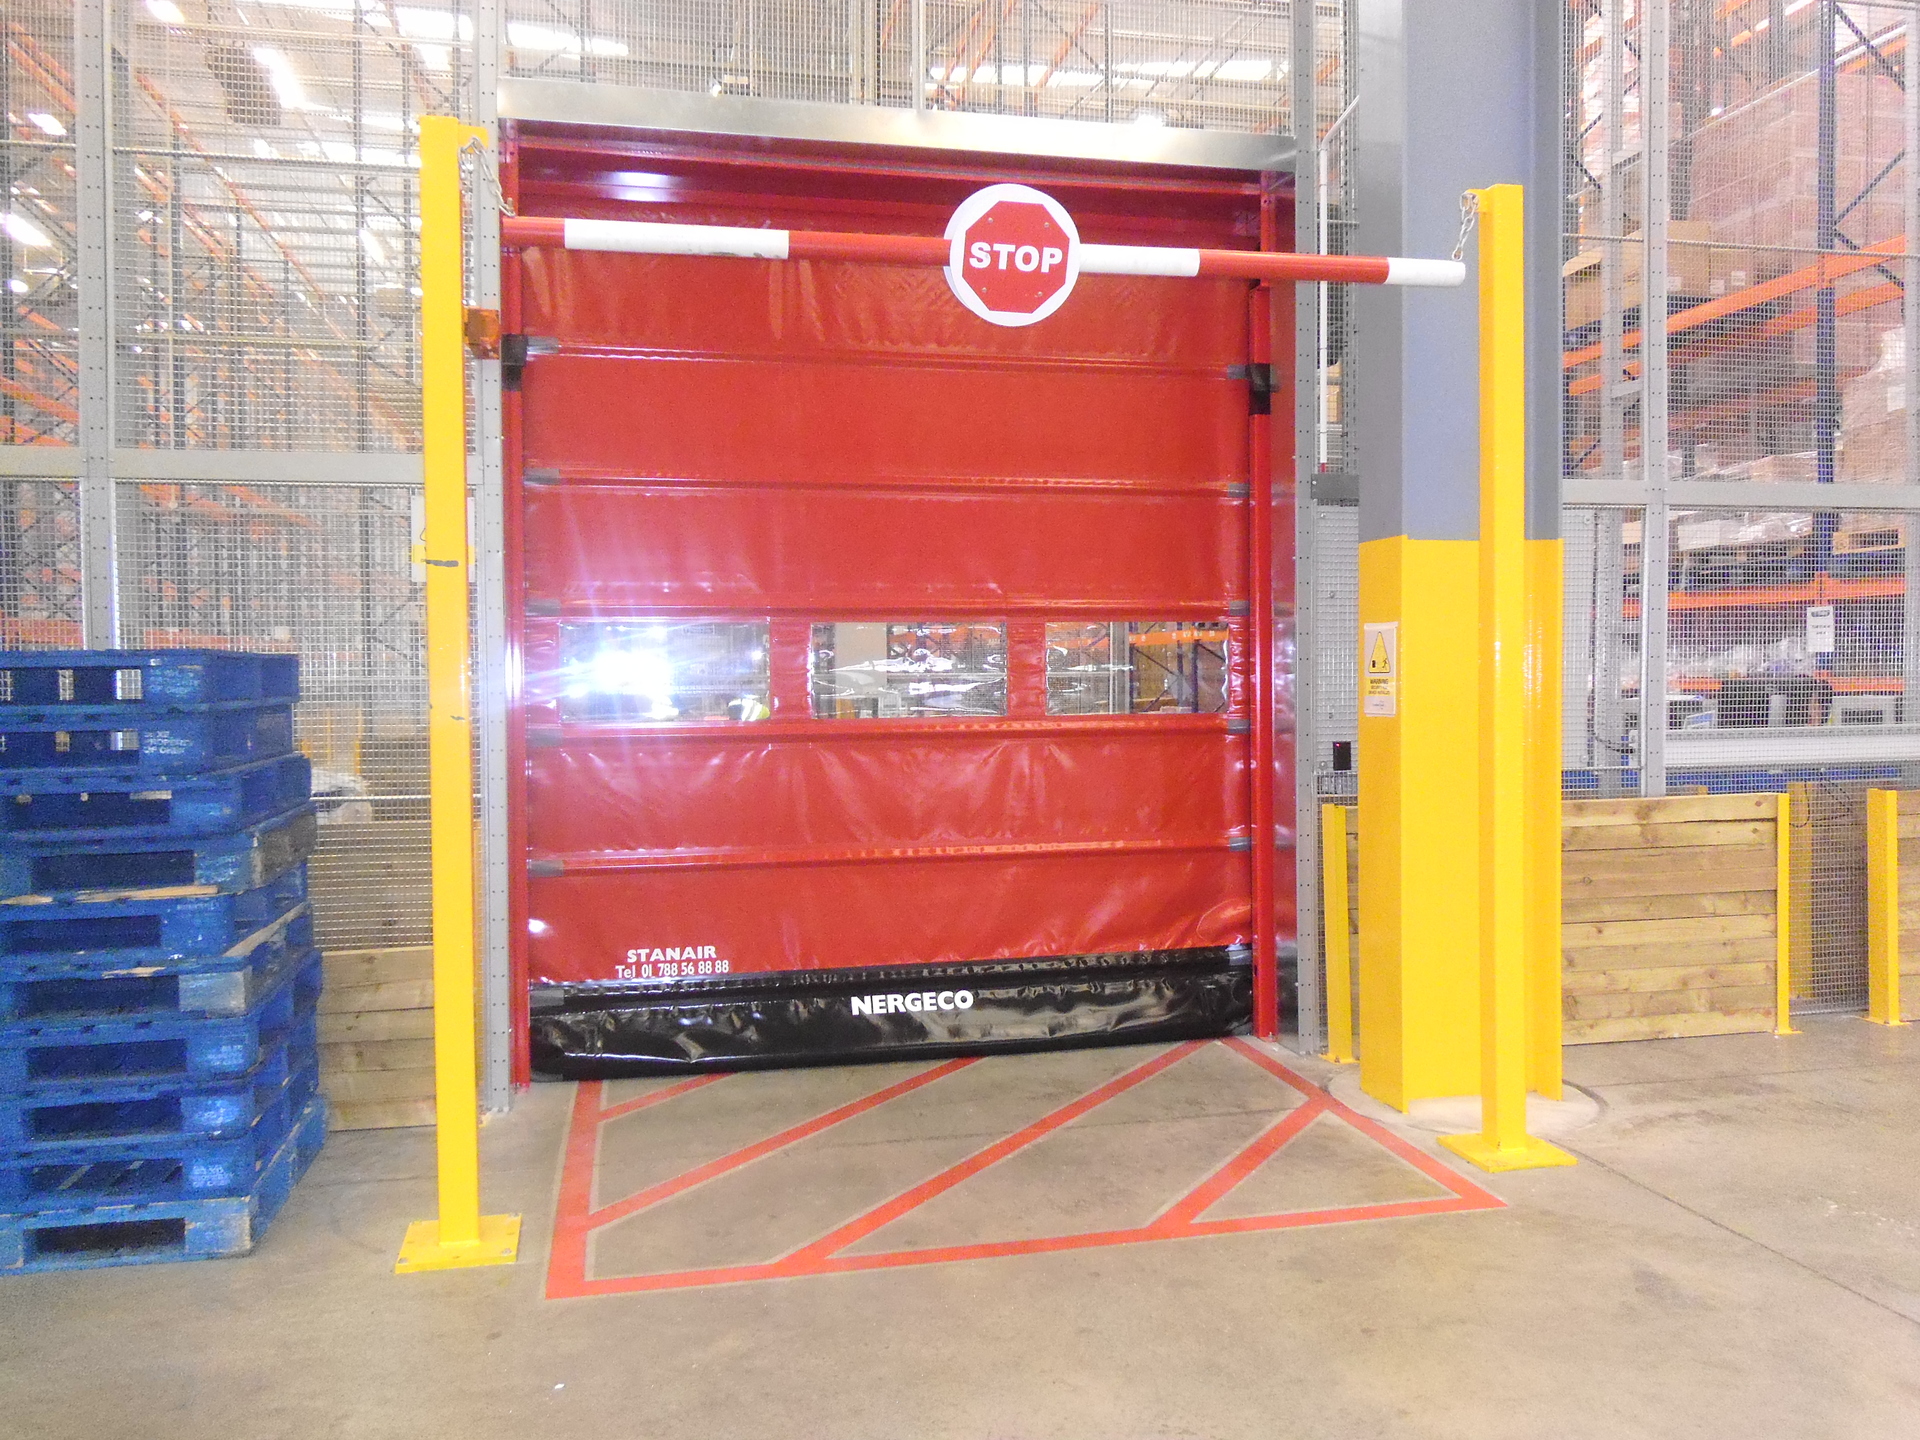 Internal Fold Up High Speed Door with warning signage and height restrictor